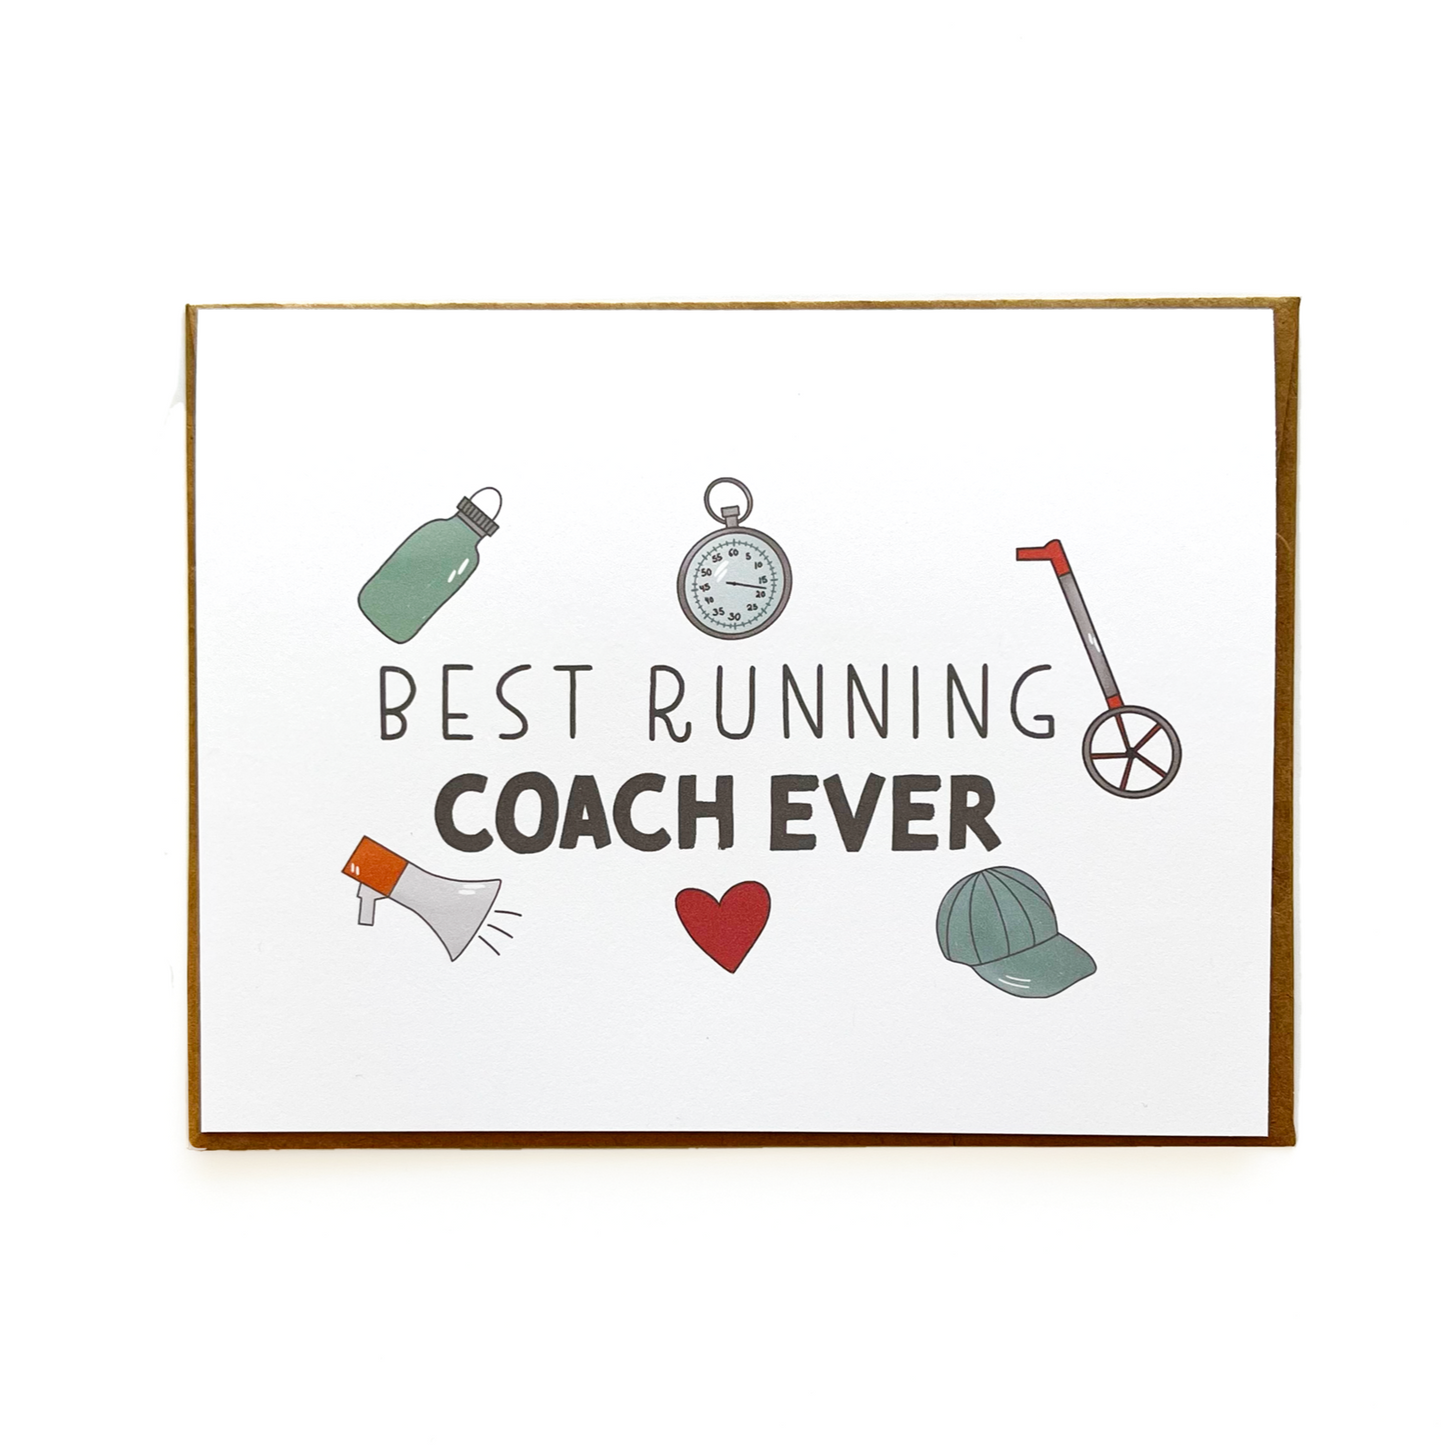 Best Running Coach Ever Card. Shows running doodles like measuring stick, stop watch, water bottle, heart, hat, and megaphone.